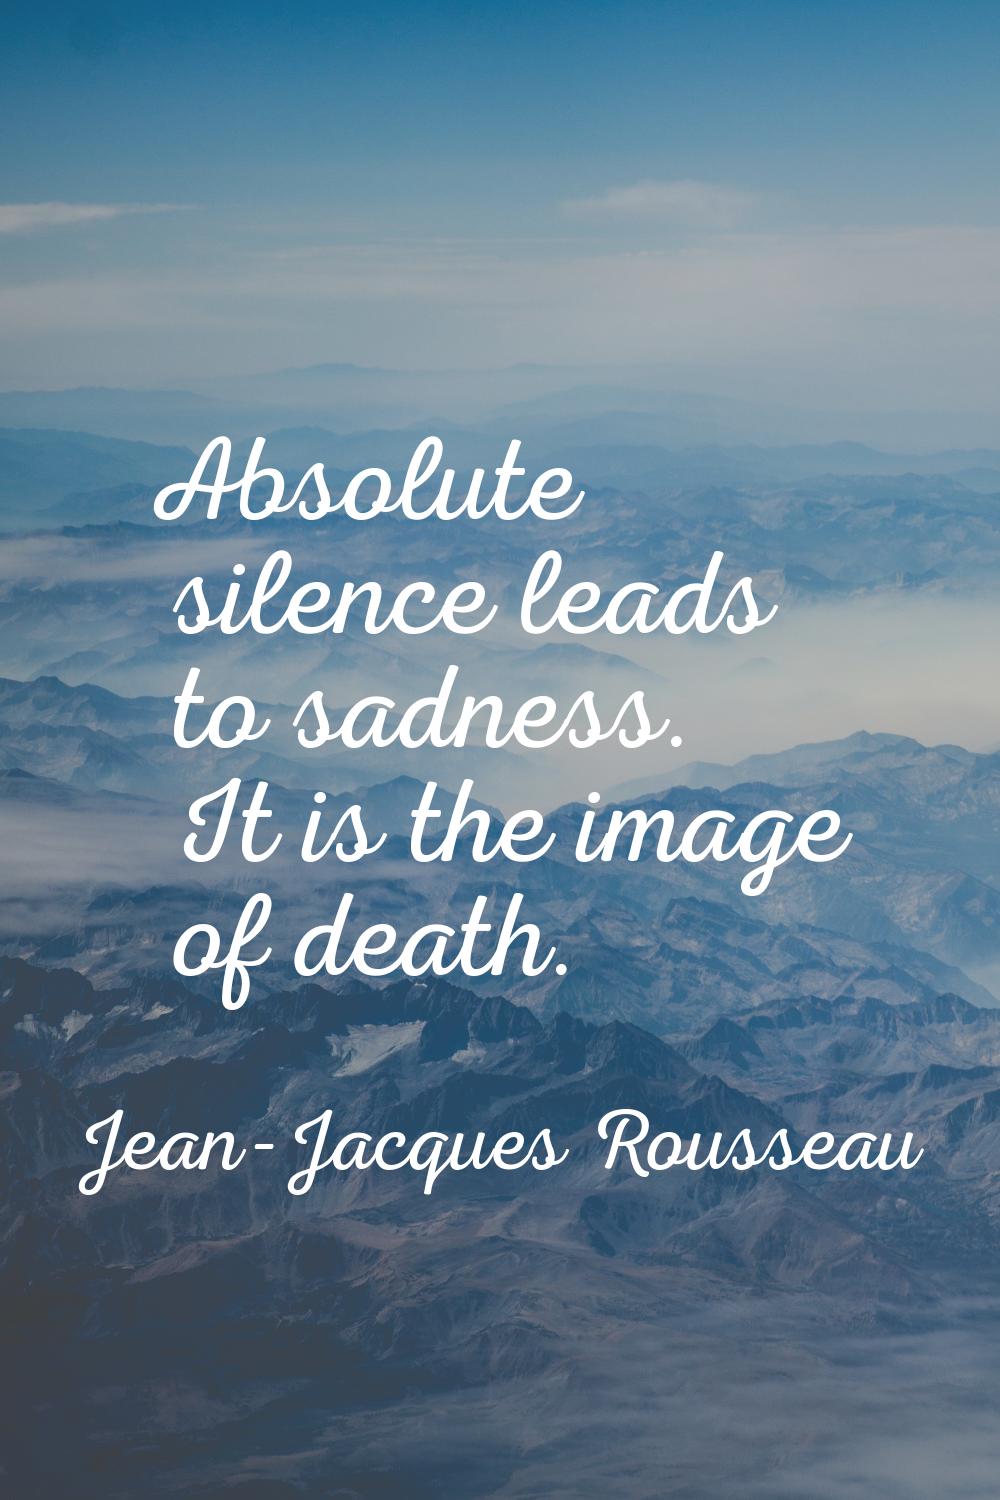 Absolute silence leads to sadness. It is the image of death.